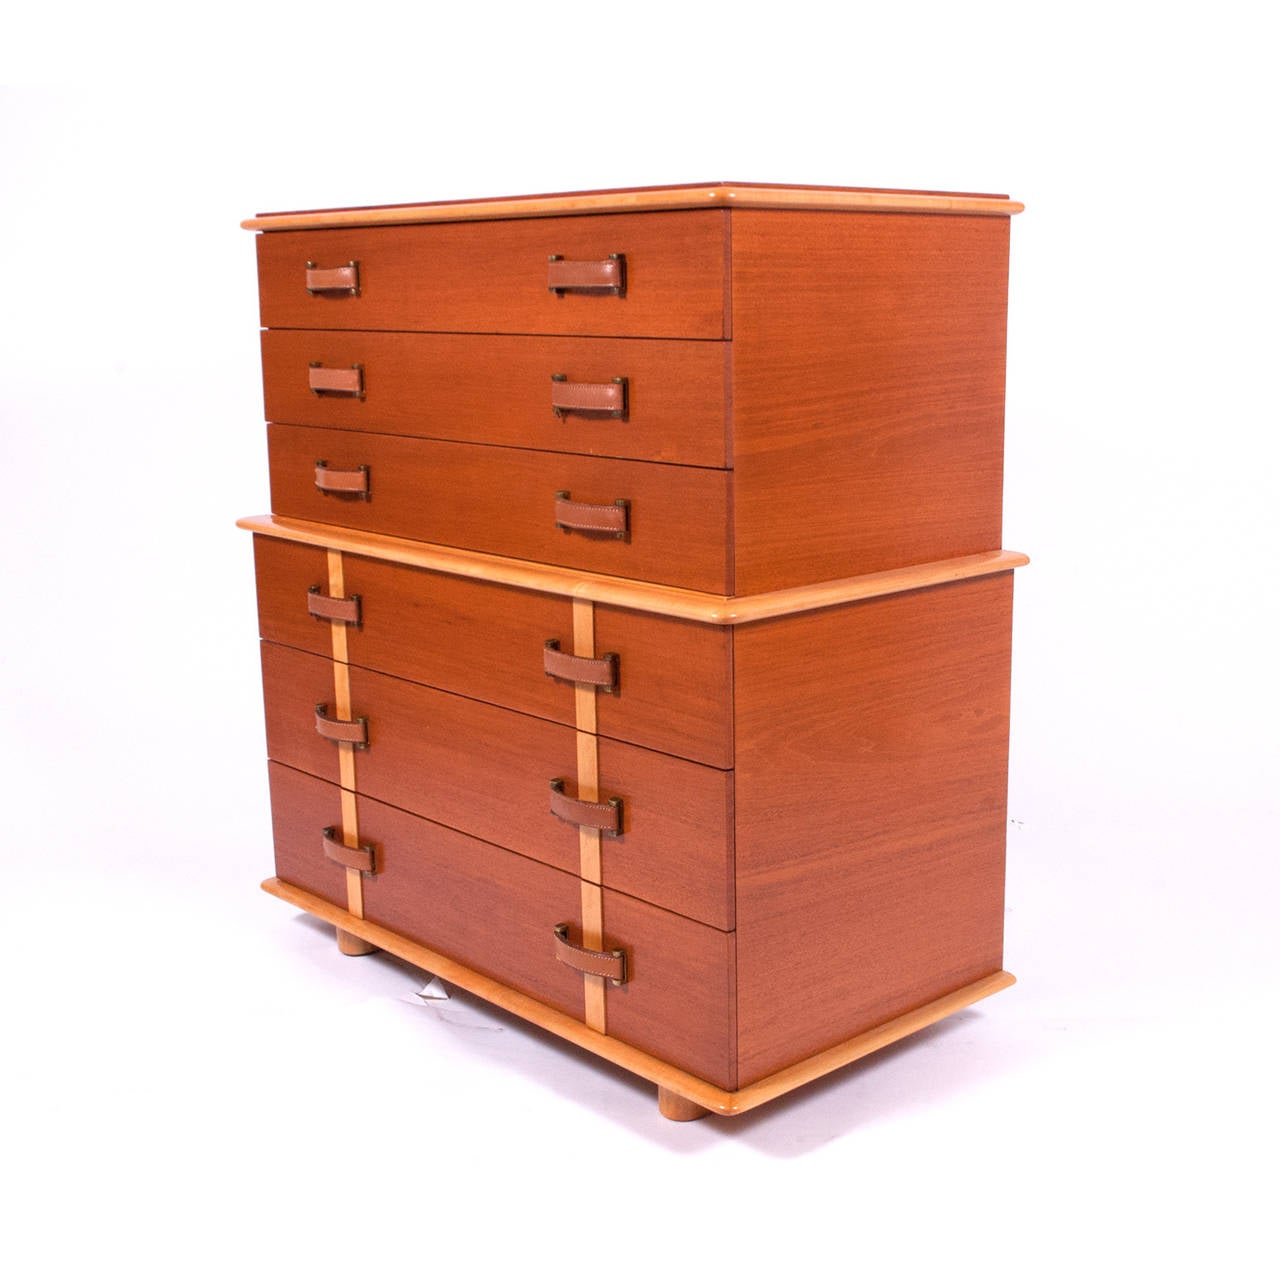 Rare high chest of drawers, in the Station Wagon series, mahogany case and drawer fronts with birch detail and legs. Leather and brass drawer pulls. Marked in drawer, Johnson Furniture Co. Marked on back with model number.